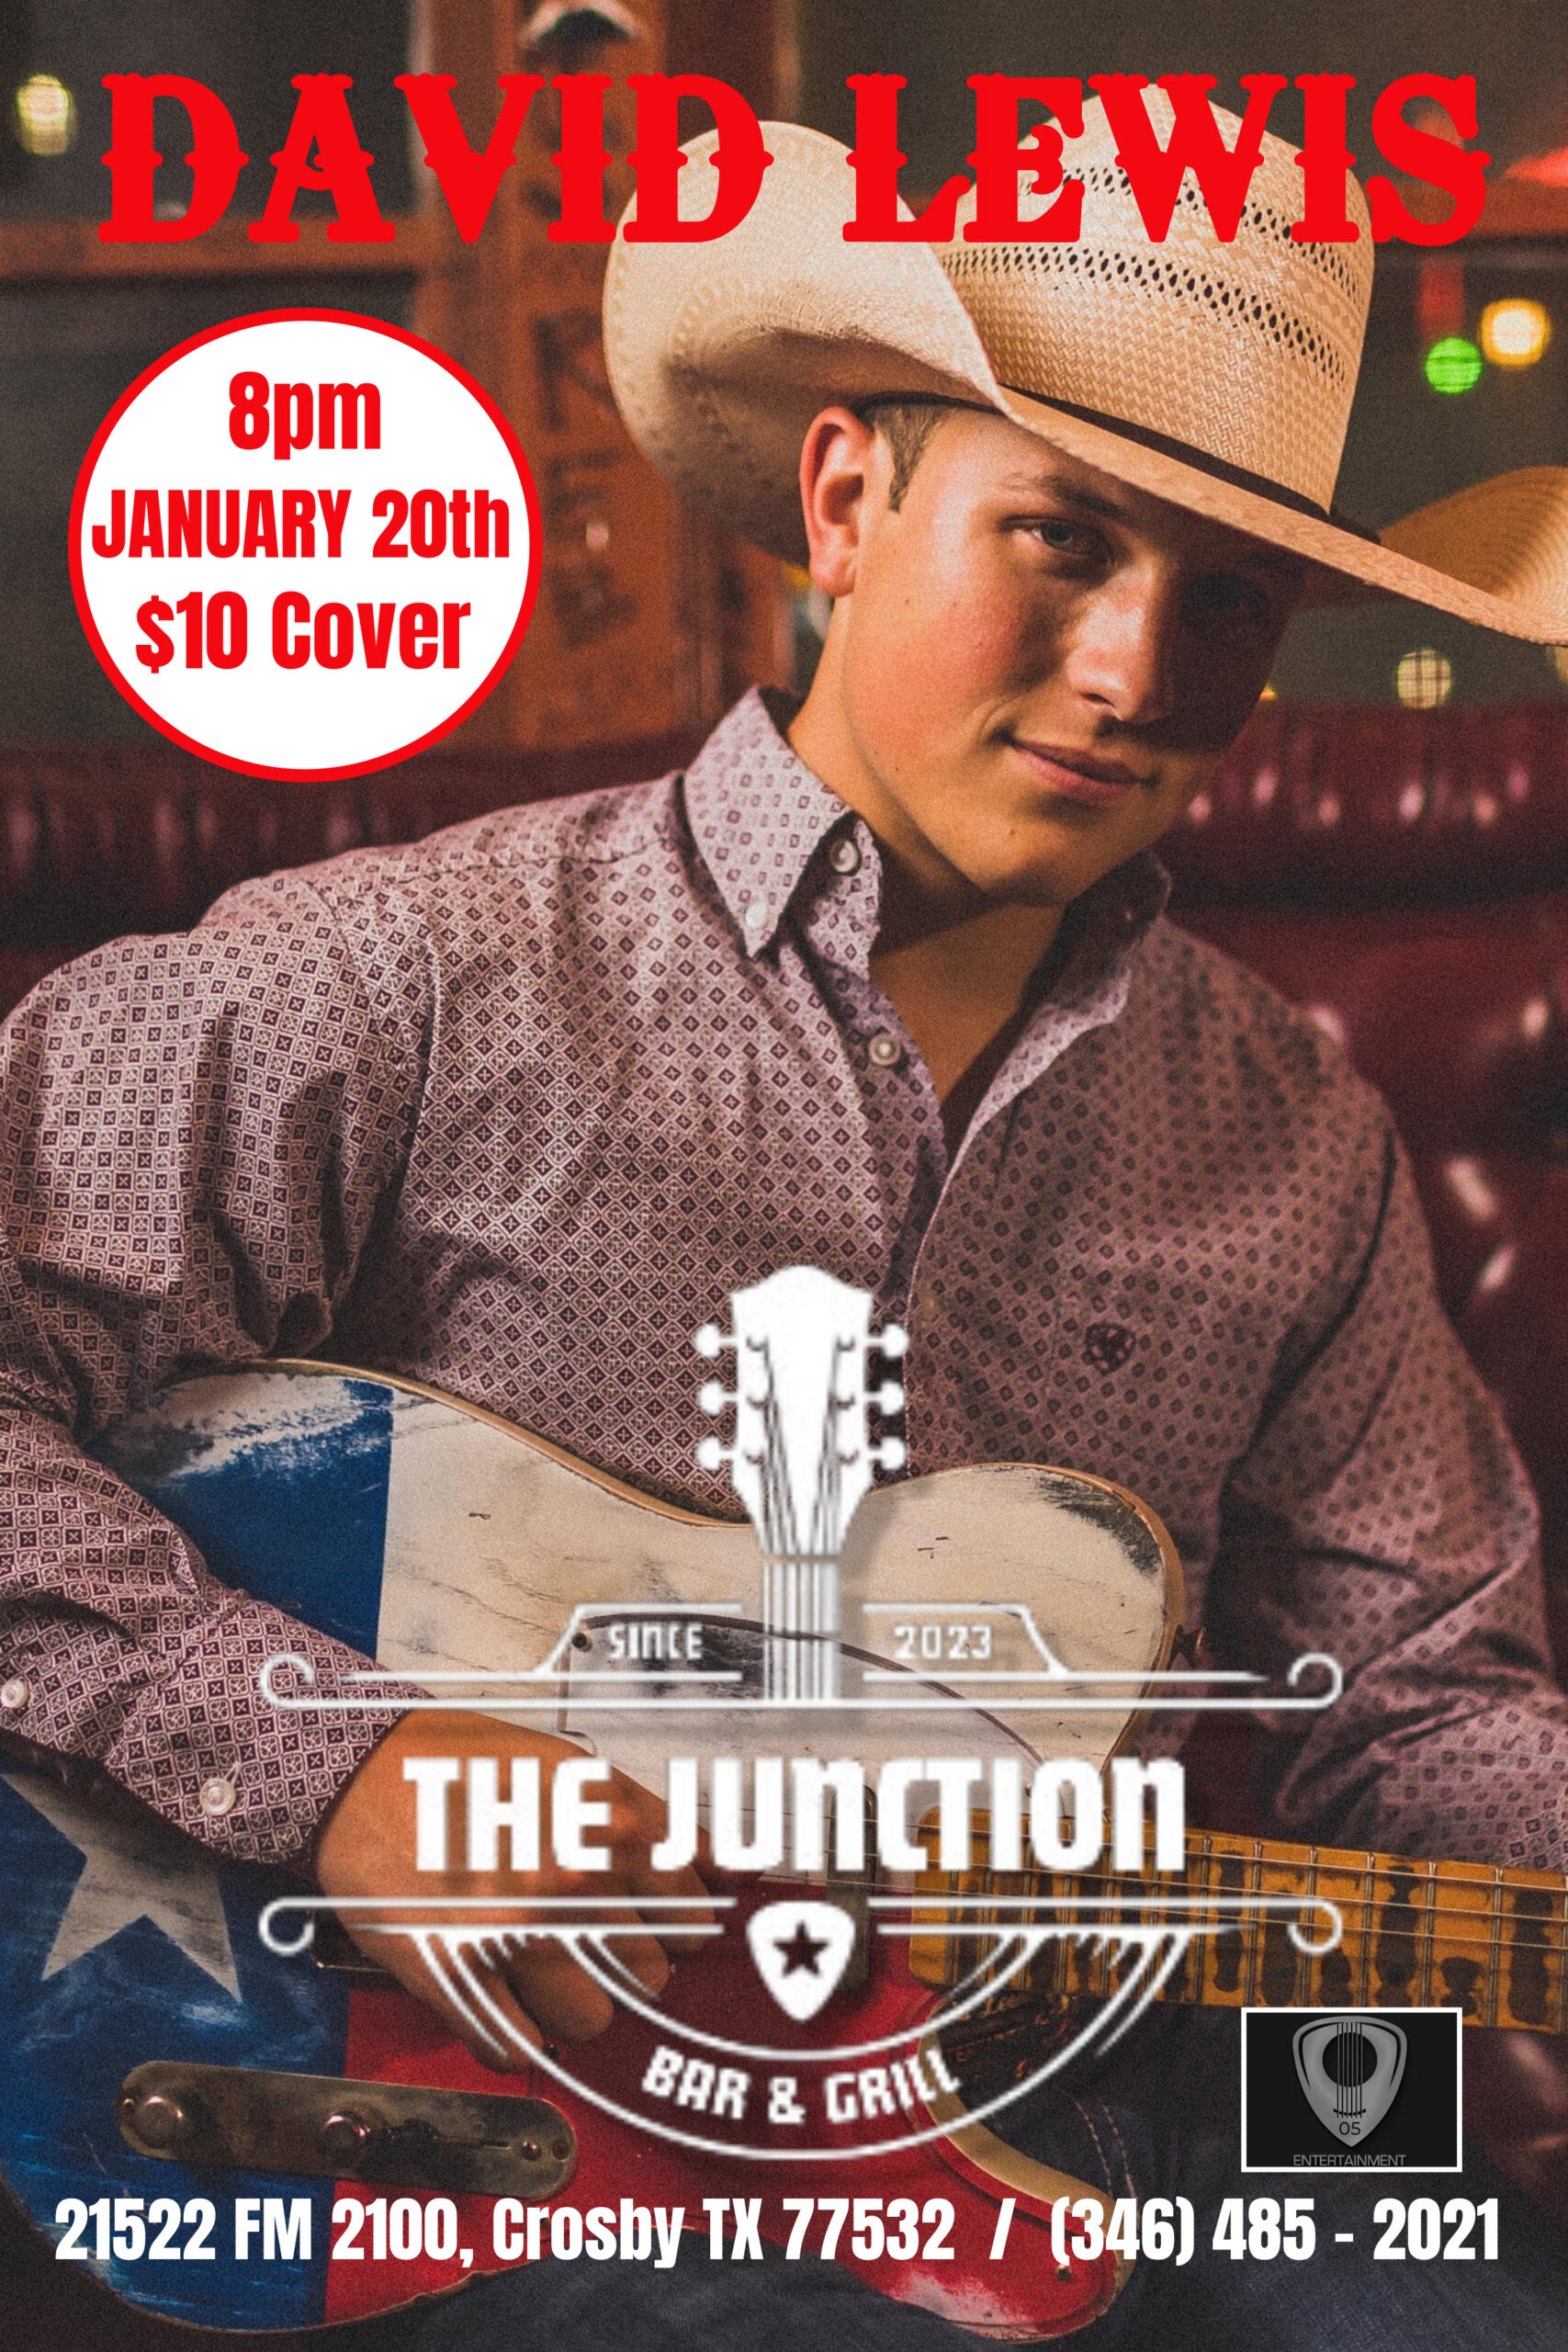 David Lewis @ The Junction Bar & Grill